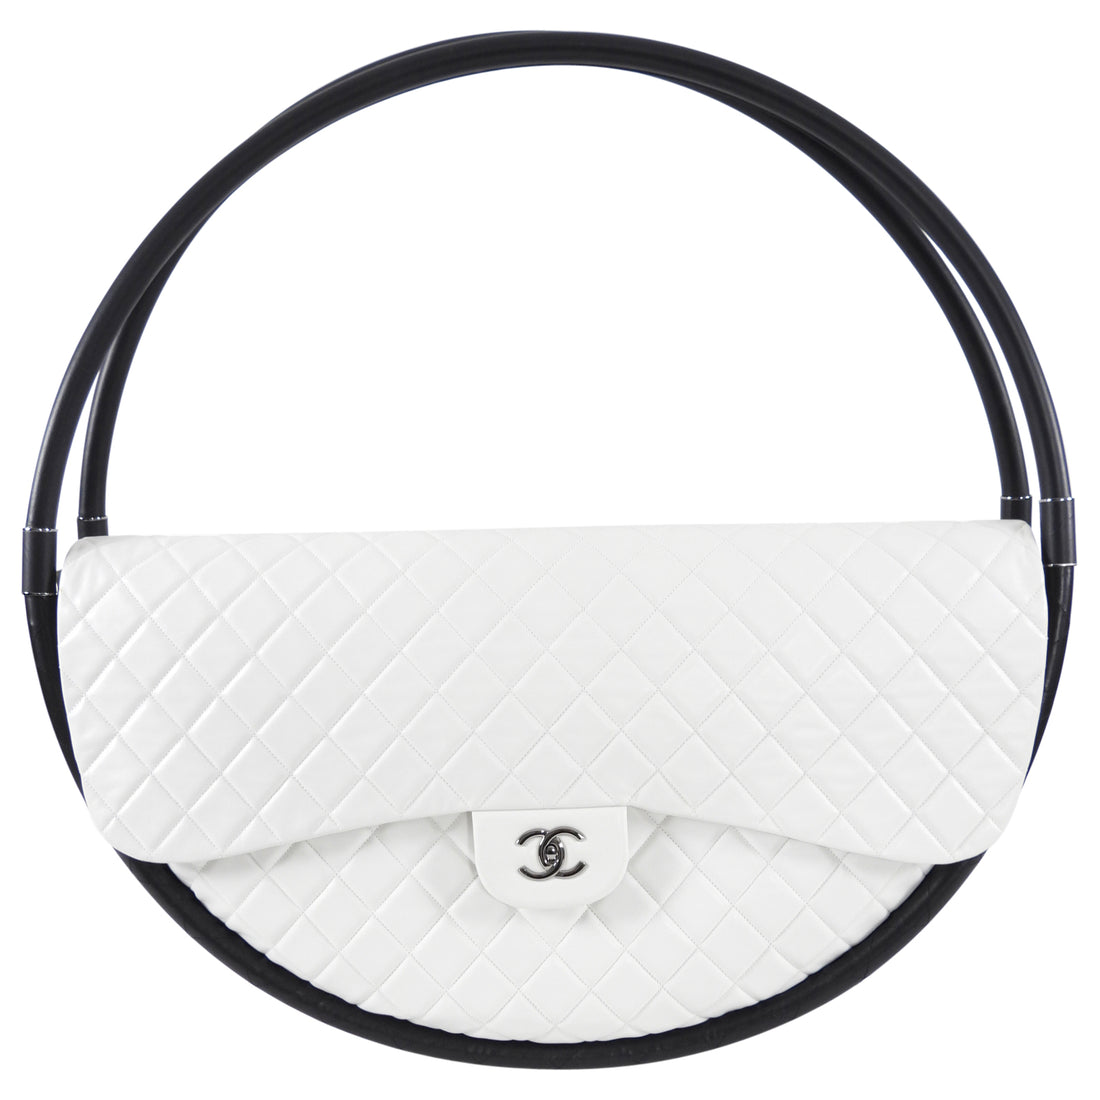 This Chanel hula hoop bag is SO iconic 💅 Let us know what other